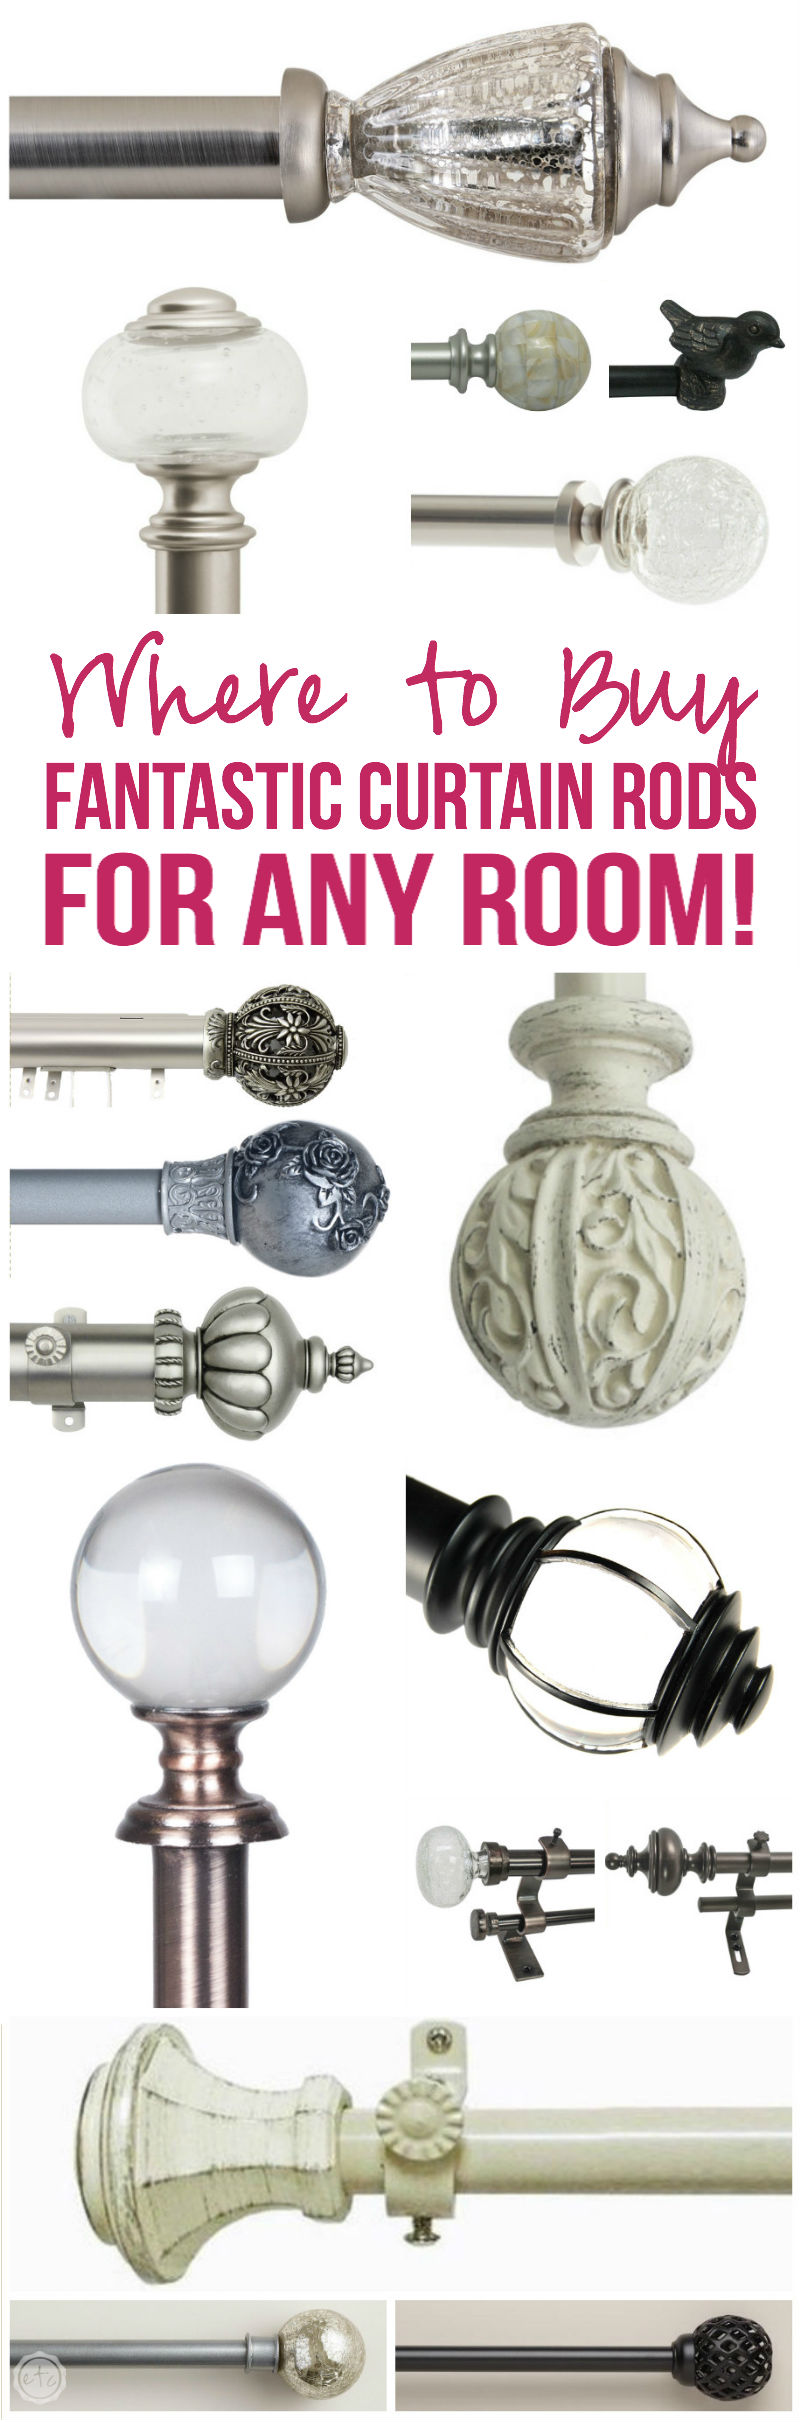 Where to Buy Fantastic Curtain Rods for Any Room with Happily Ever After, Etc